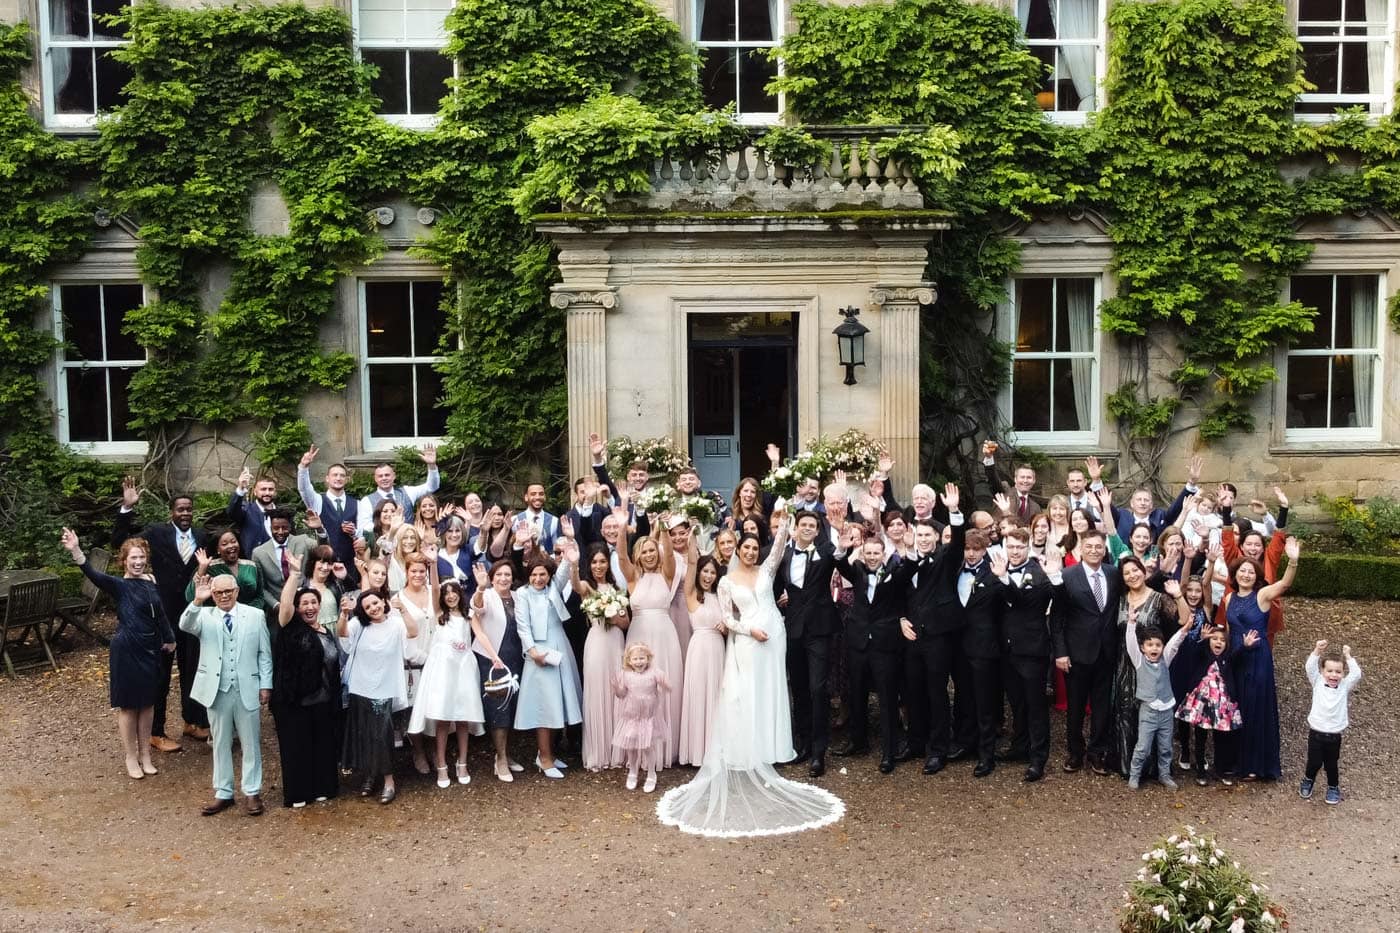 bridal party group photographs at eshott hall during their wedding day photography